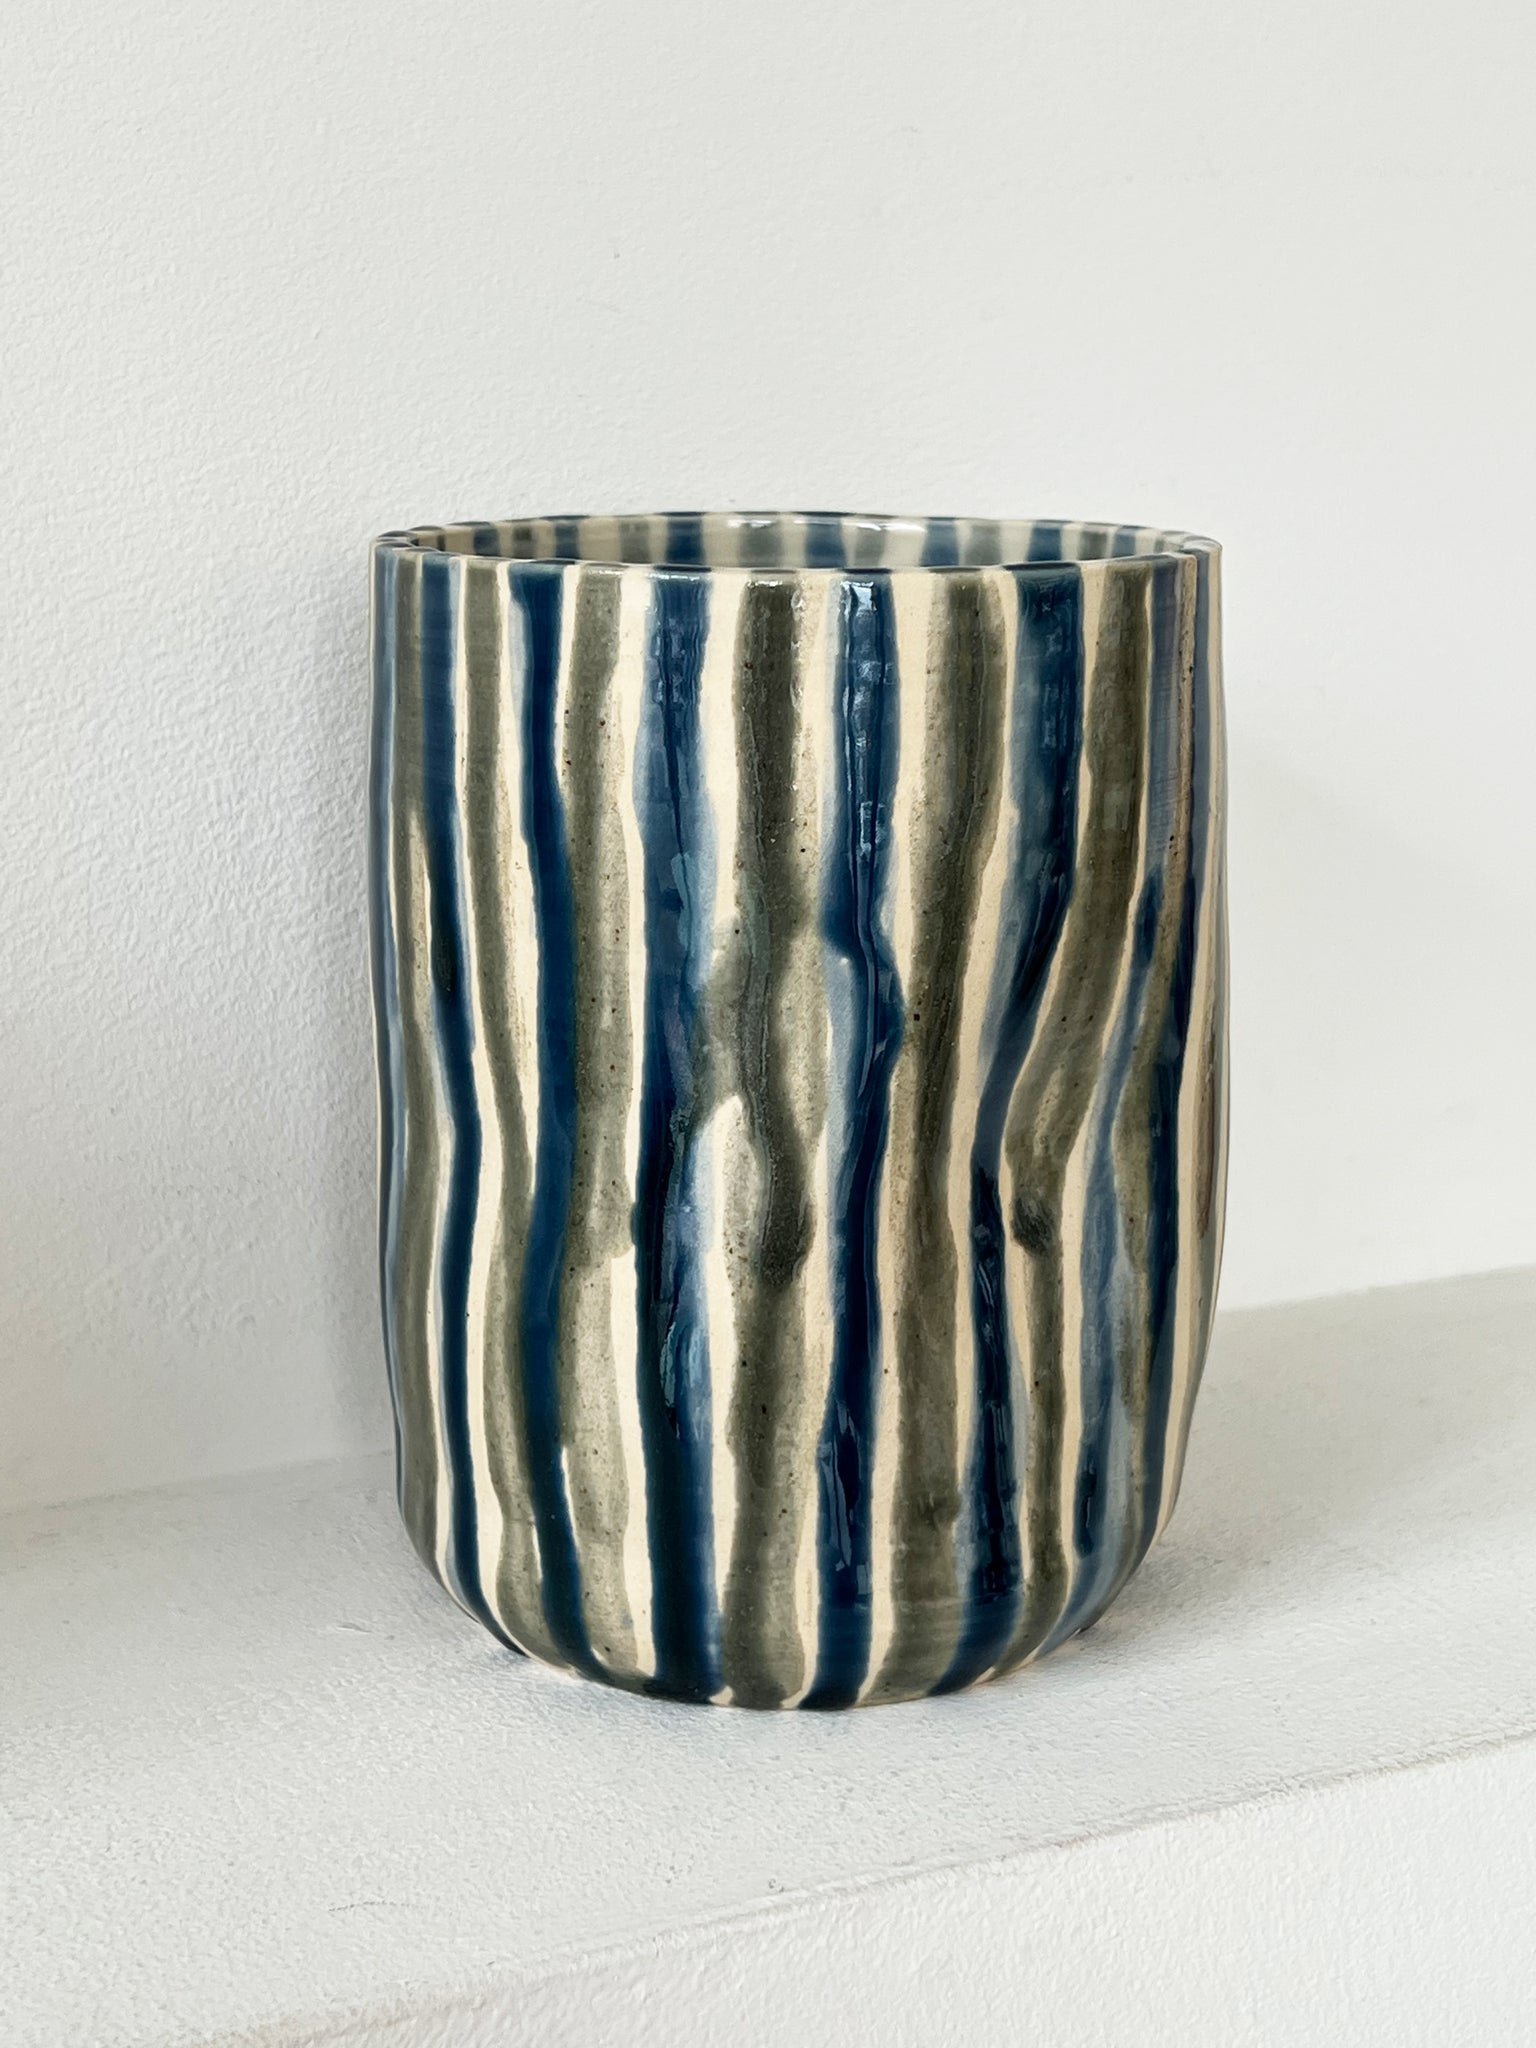 Femme Sole x Home Union Striped Pinched Flower Vase